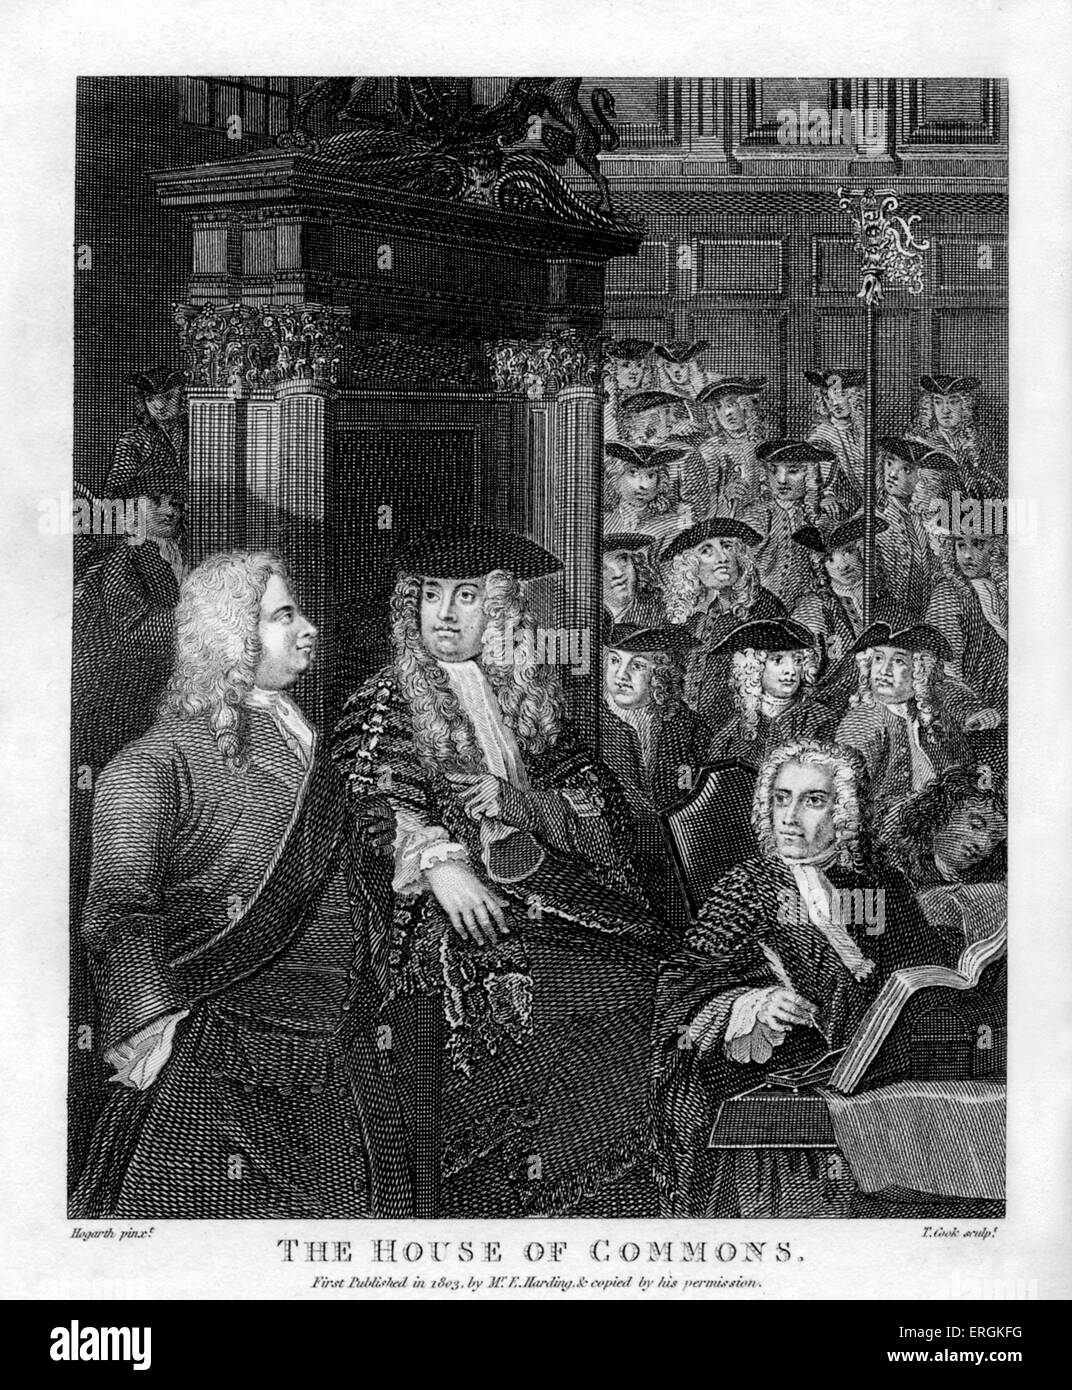 The House of Commons by William Hogarth, 1803. Engraved by Thomas Cook. Gathered are: Arthur Onslow (1691-1768), then speaker of the house; Robert Walpole (1676-1745), left, Britian's first Prime Minister; Sidney Godolphin (1652-1732), right, the so called 'Father of the House'. Stock Photo